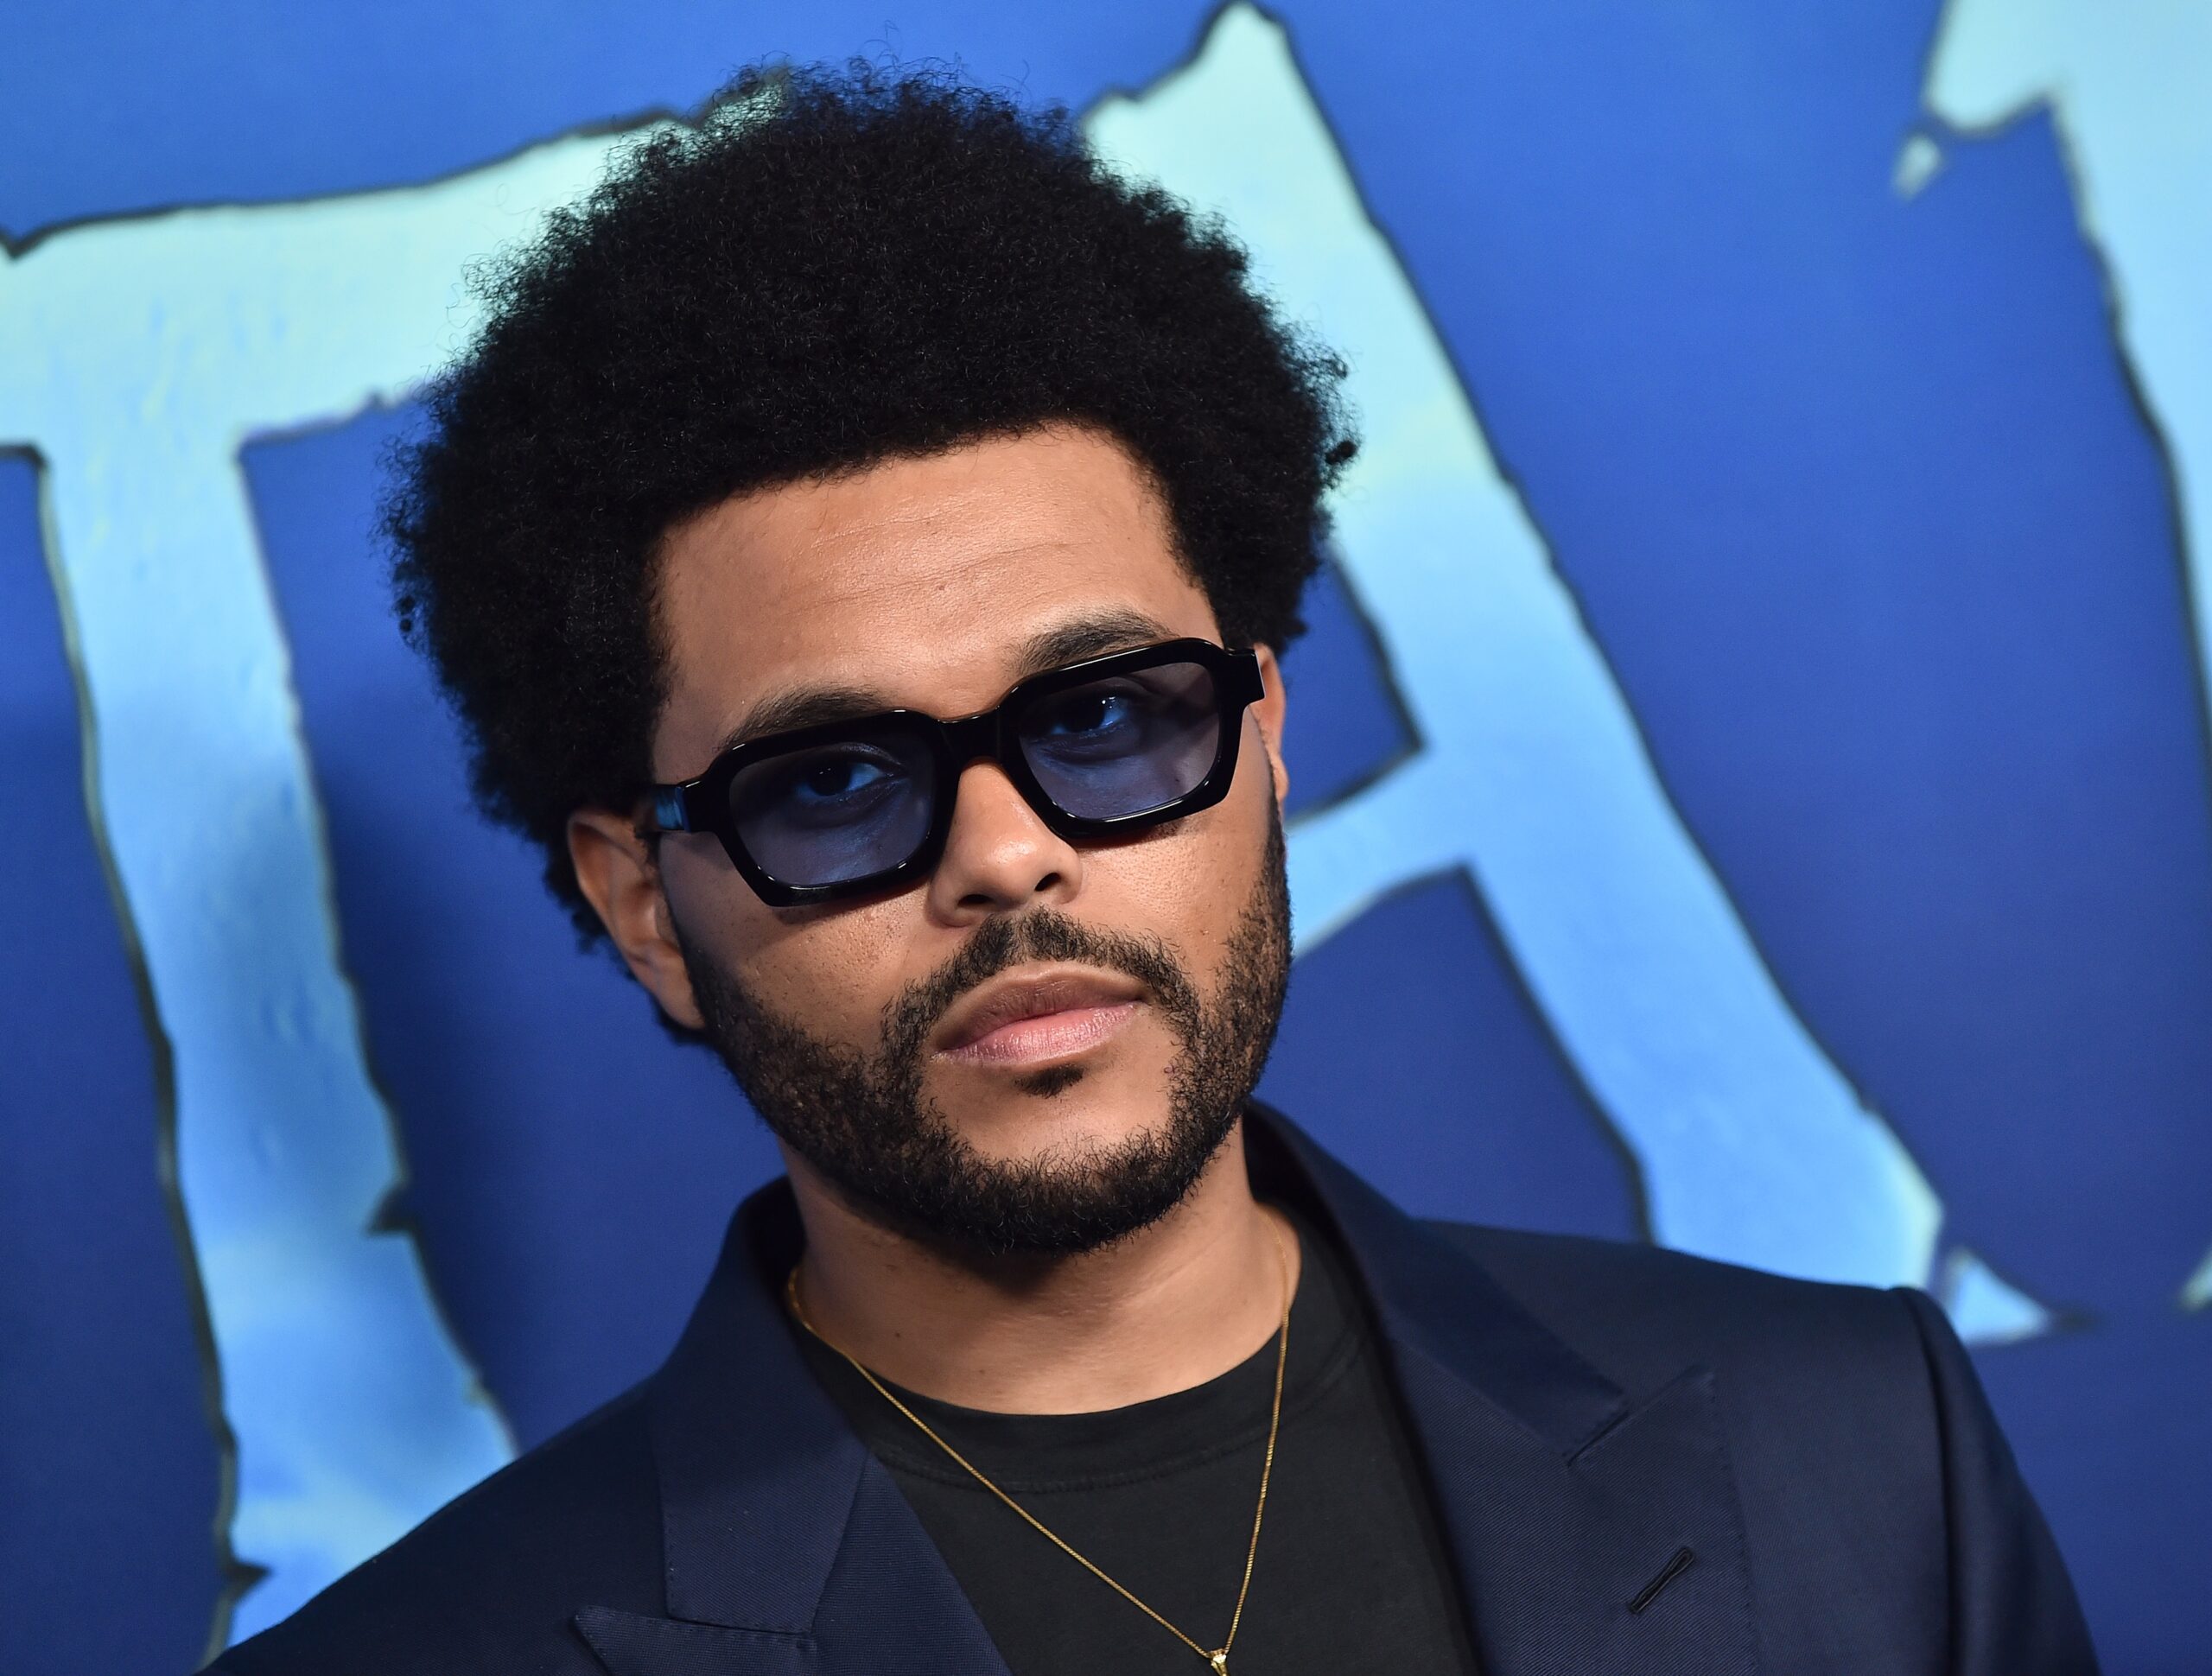 <p>In 2022, Canadian singer-songwriter The Weeknd went on his seventh concert tour to promote his albums Dawn FM and After Hours, featuring his blend of pop, electronic music, and R&B. Fans paid up to $2,071 for VIP ticket packages that offered special perks like premium seating, exclusive merchandise, and access to a pre-show party pass.</p>